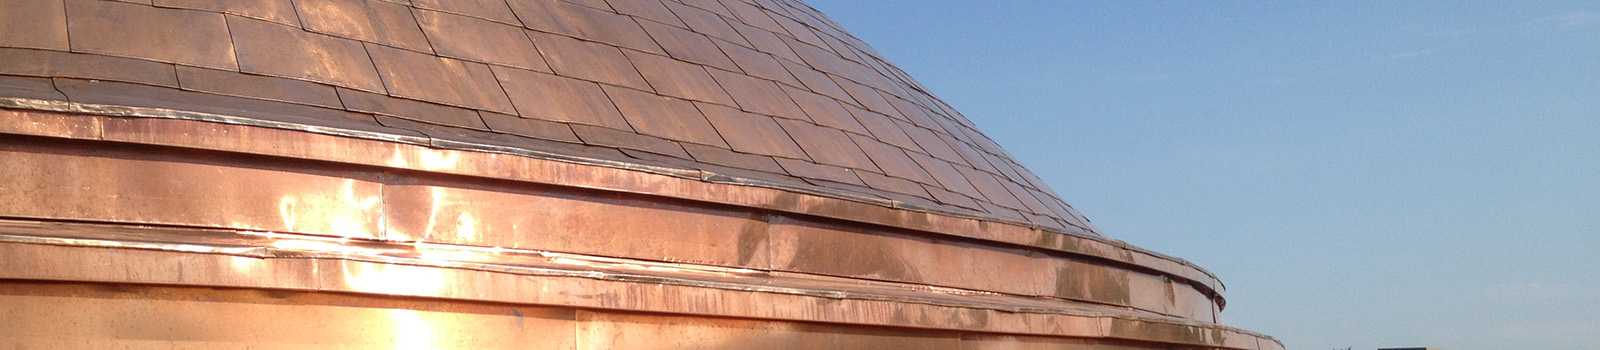 Residential copper roofing systems